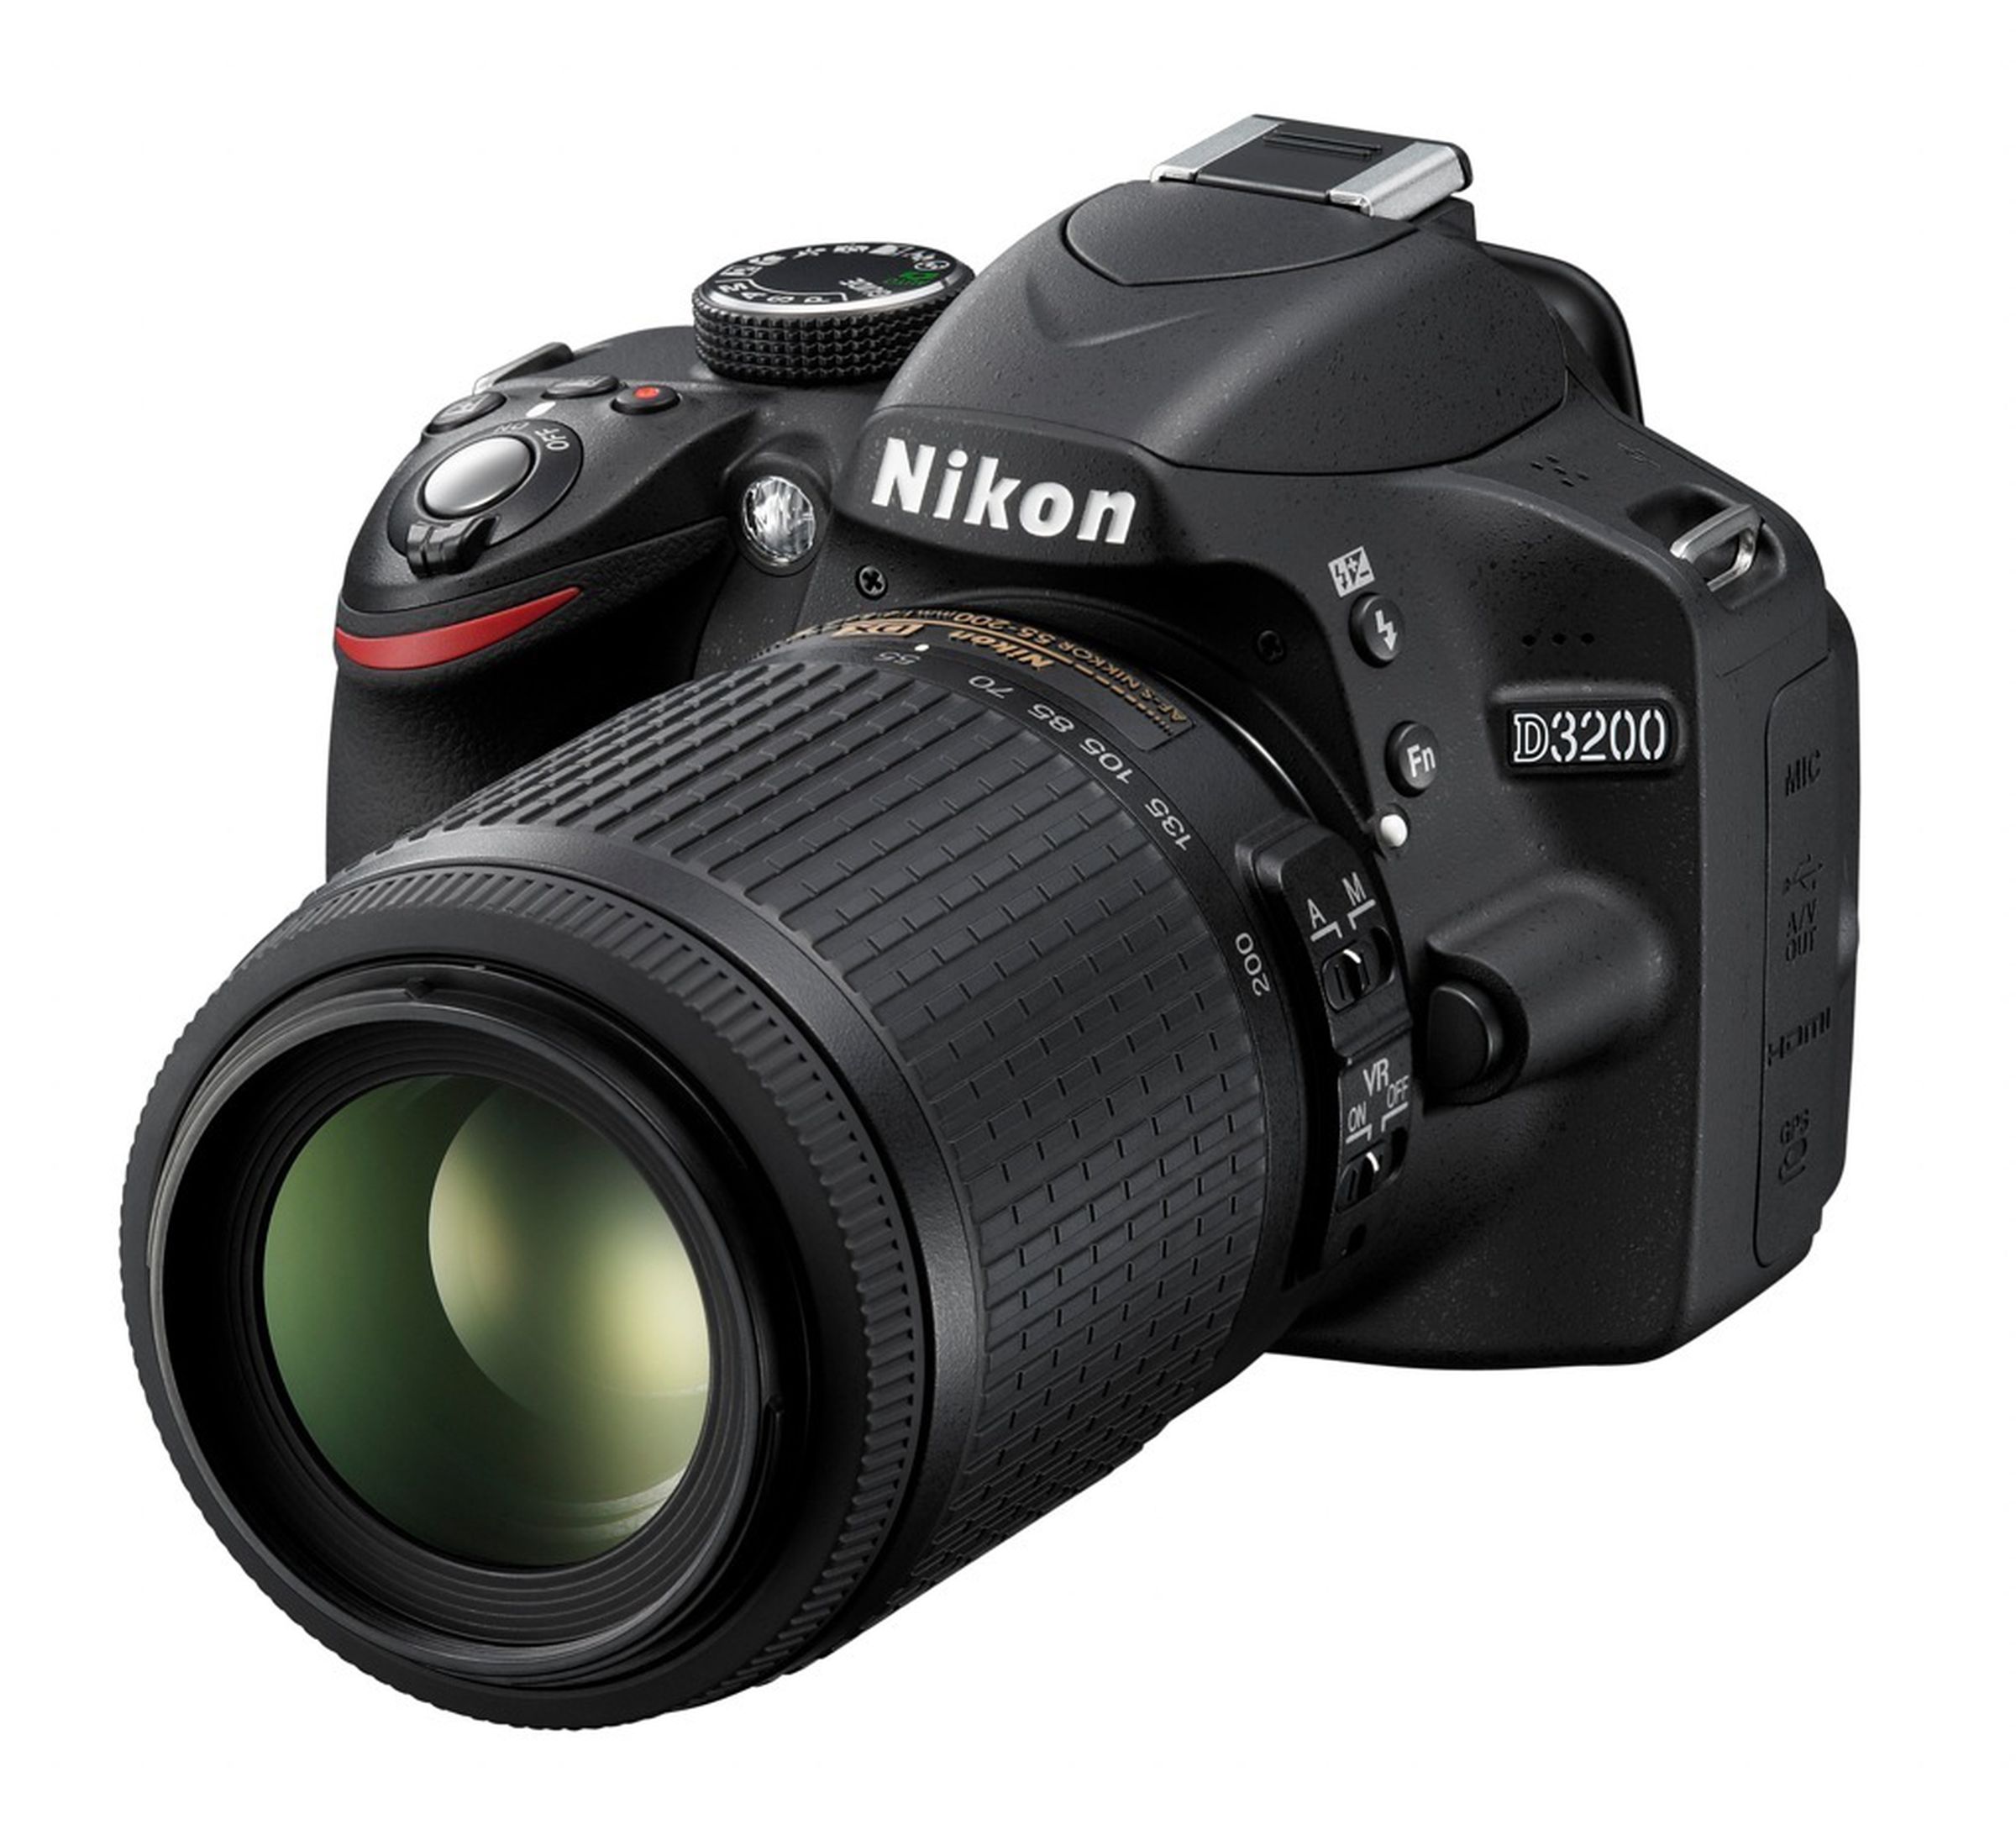 Nikon D3200 and WU-1a Wireless Mobile Adapter press shots